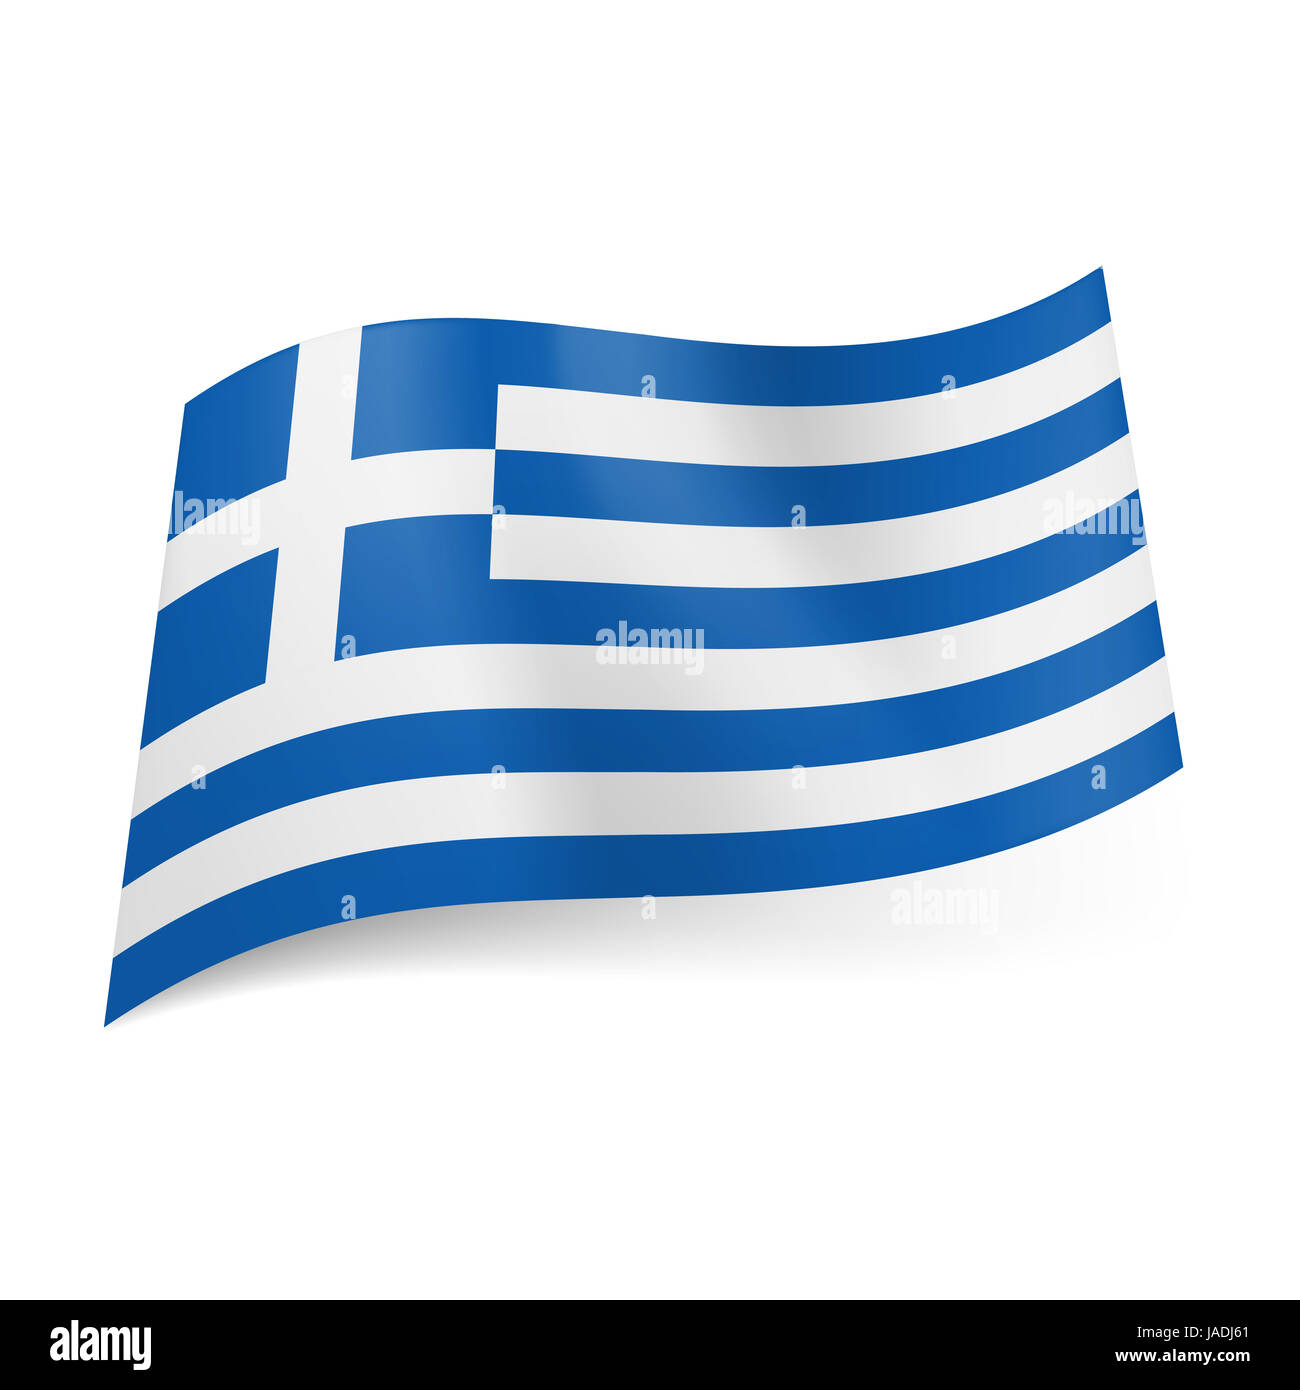 National flag of Greece: blue and white horizontal stripes with white cross  in blue square in upper left corner Stock Photo - Alamy